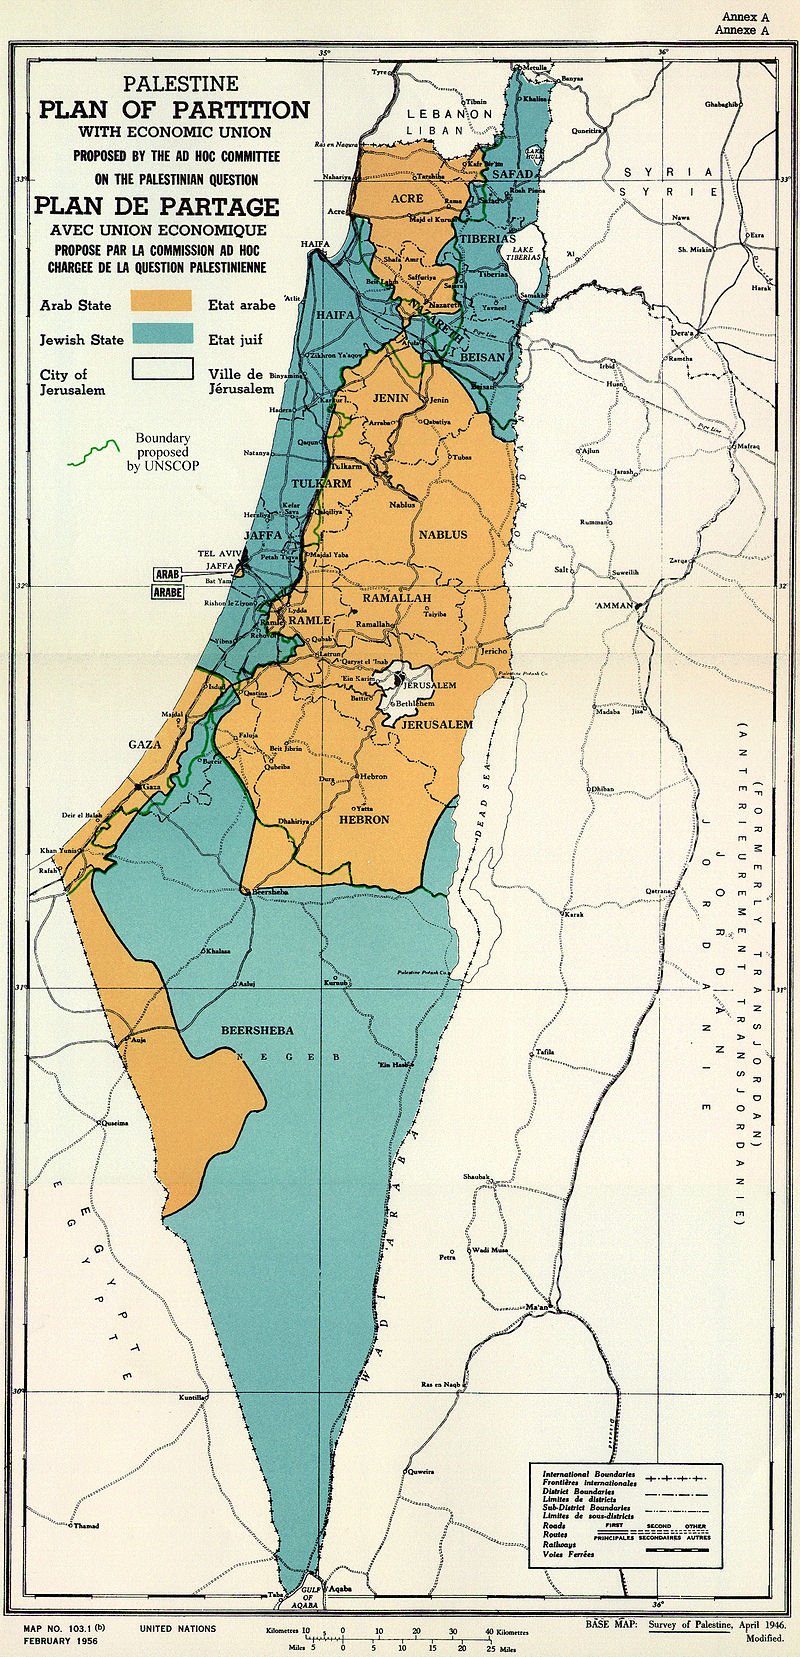 Map of UN Partition Plan for Palestine, adopted November 29, 1947